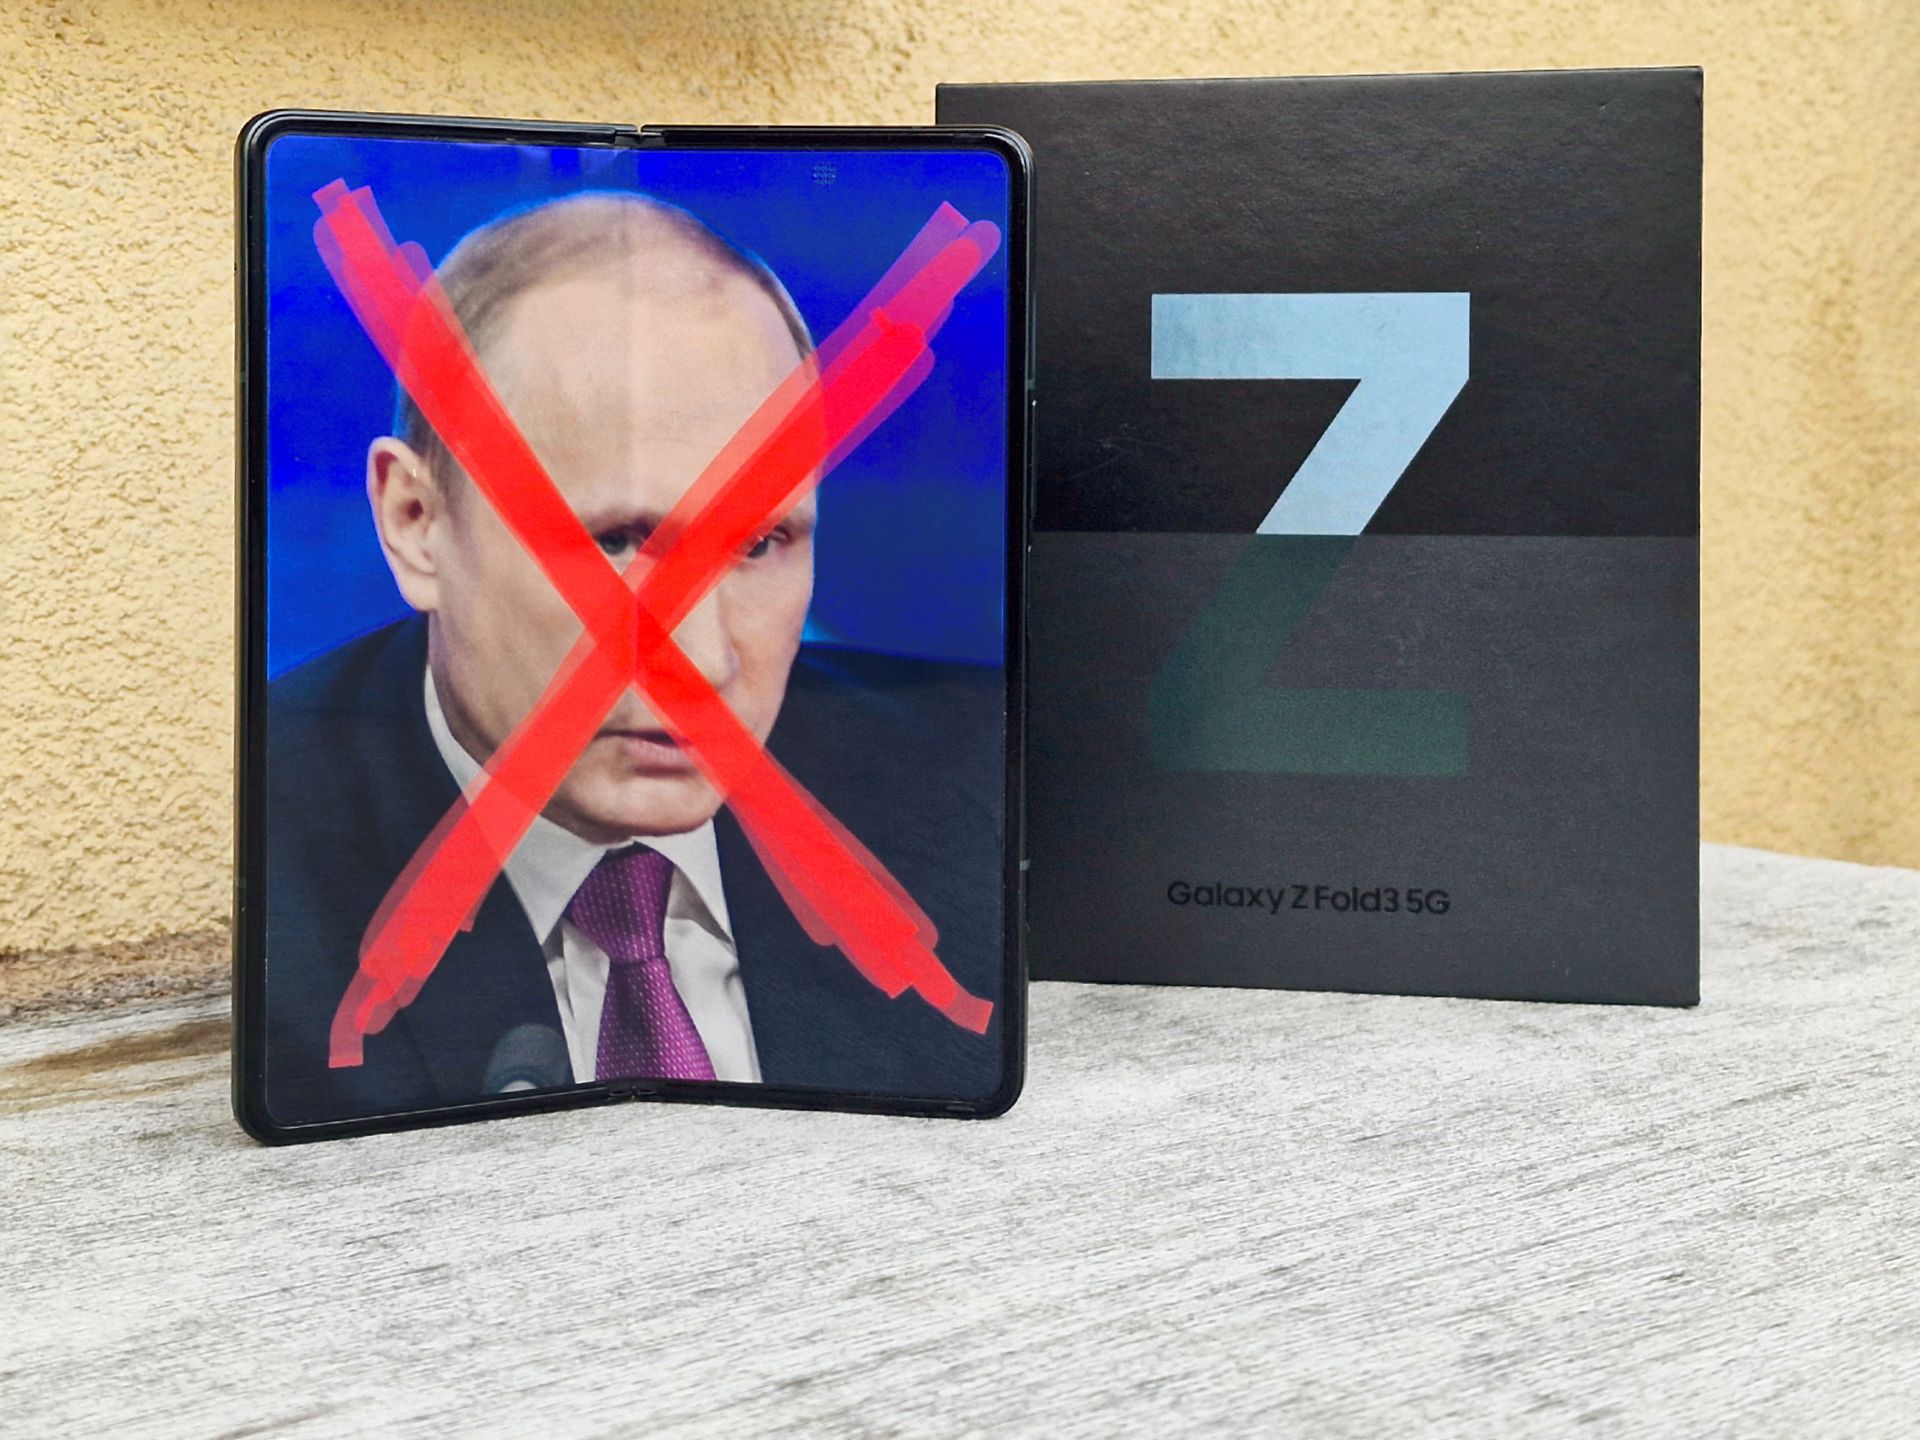 Samsung is changing the names and packaging of smartphones.  Want to avoid being associated with Putin?